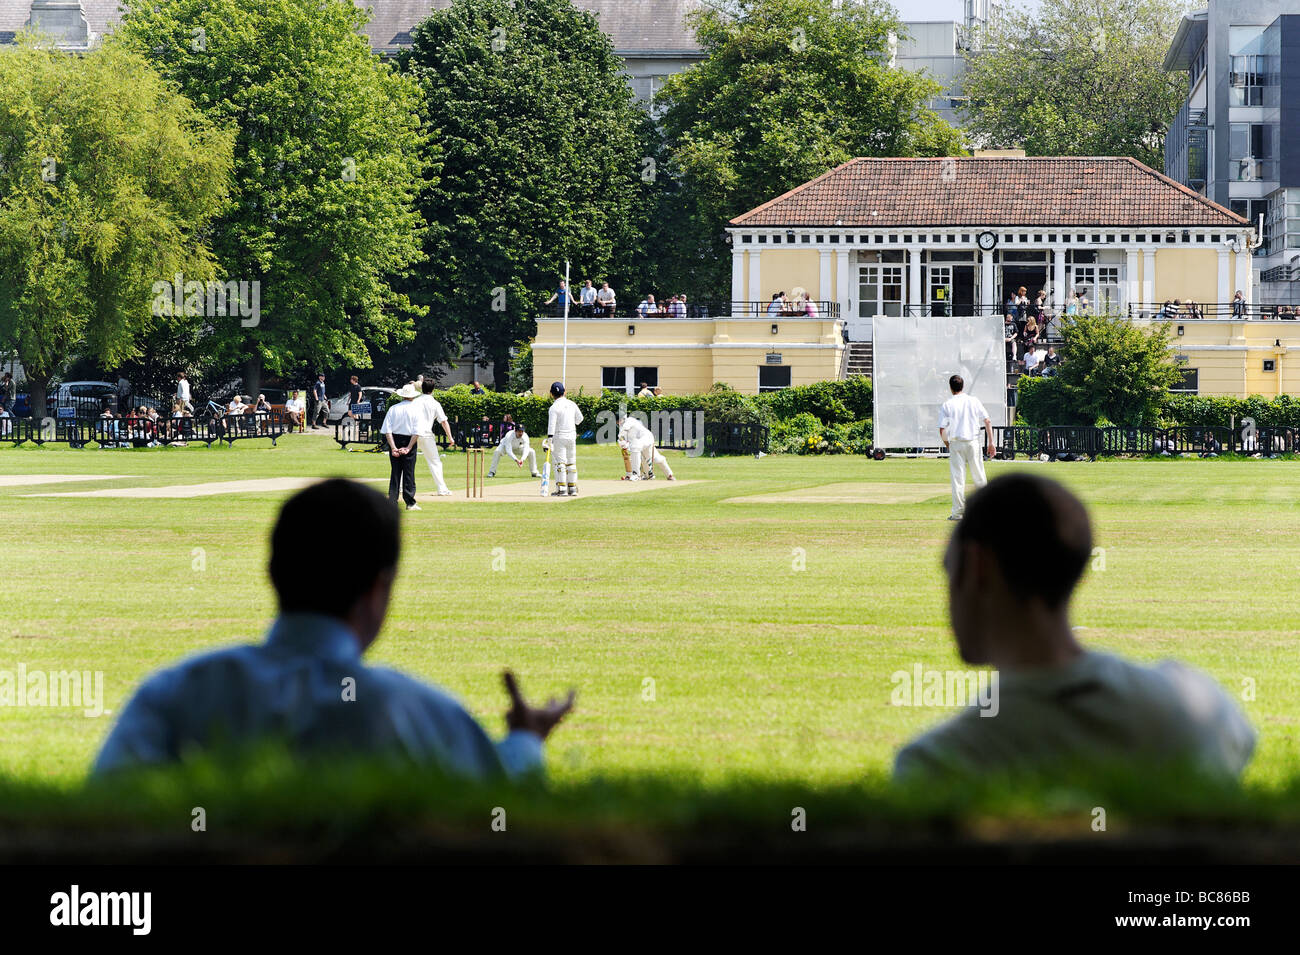 Onlookers watching a match during lunch break at Trinity College cricket club grounds in central Dublin Republic of Ireland Stock Photo